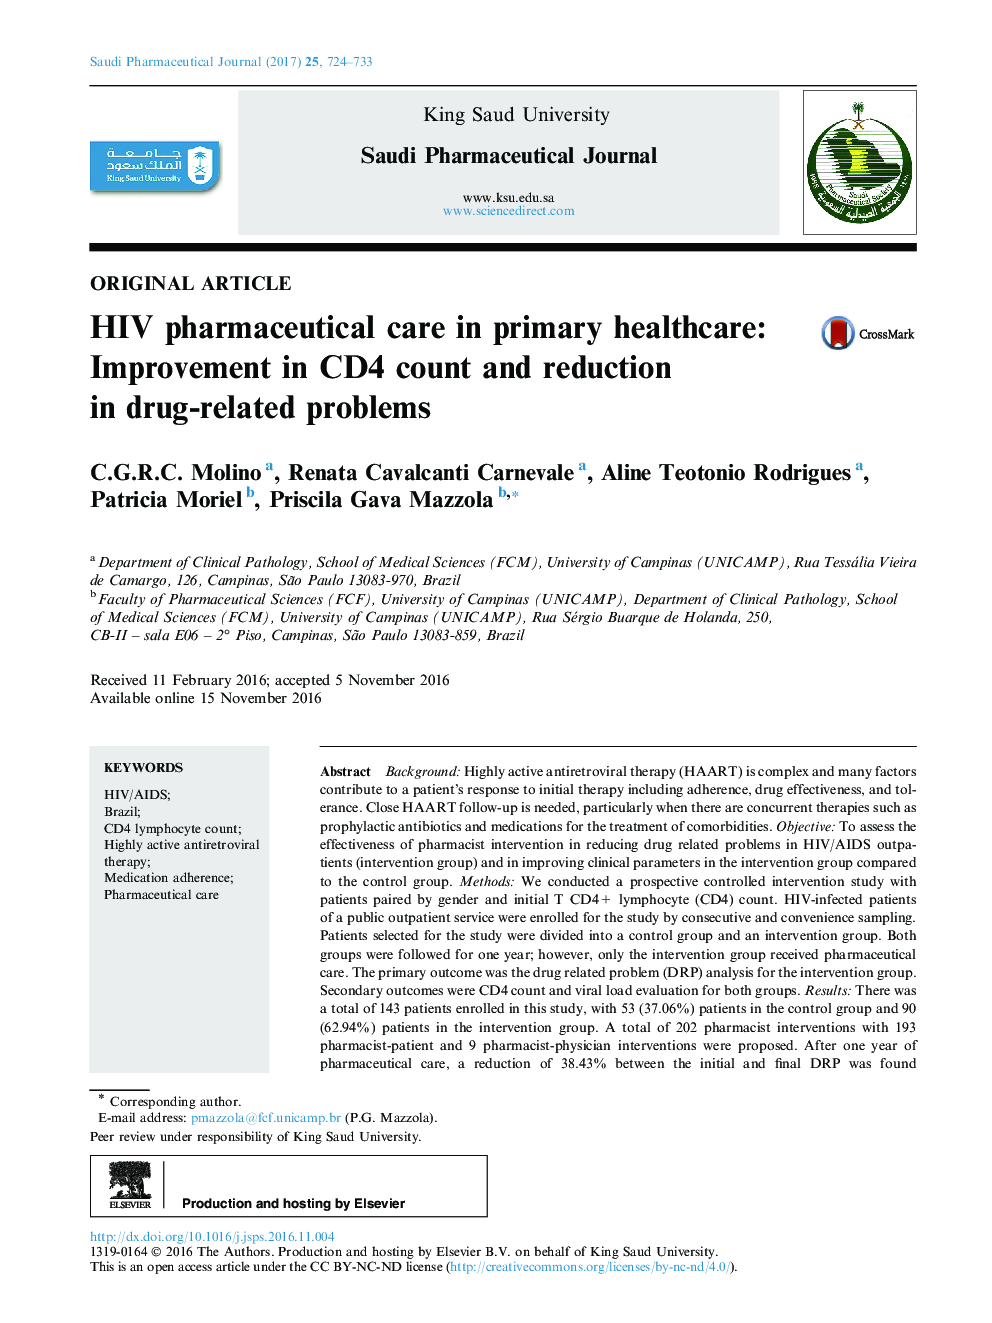 HIV pharmaceutical care in primary healthcare: Improvement in CD4 count and reduction in drug-related problems